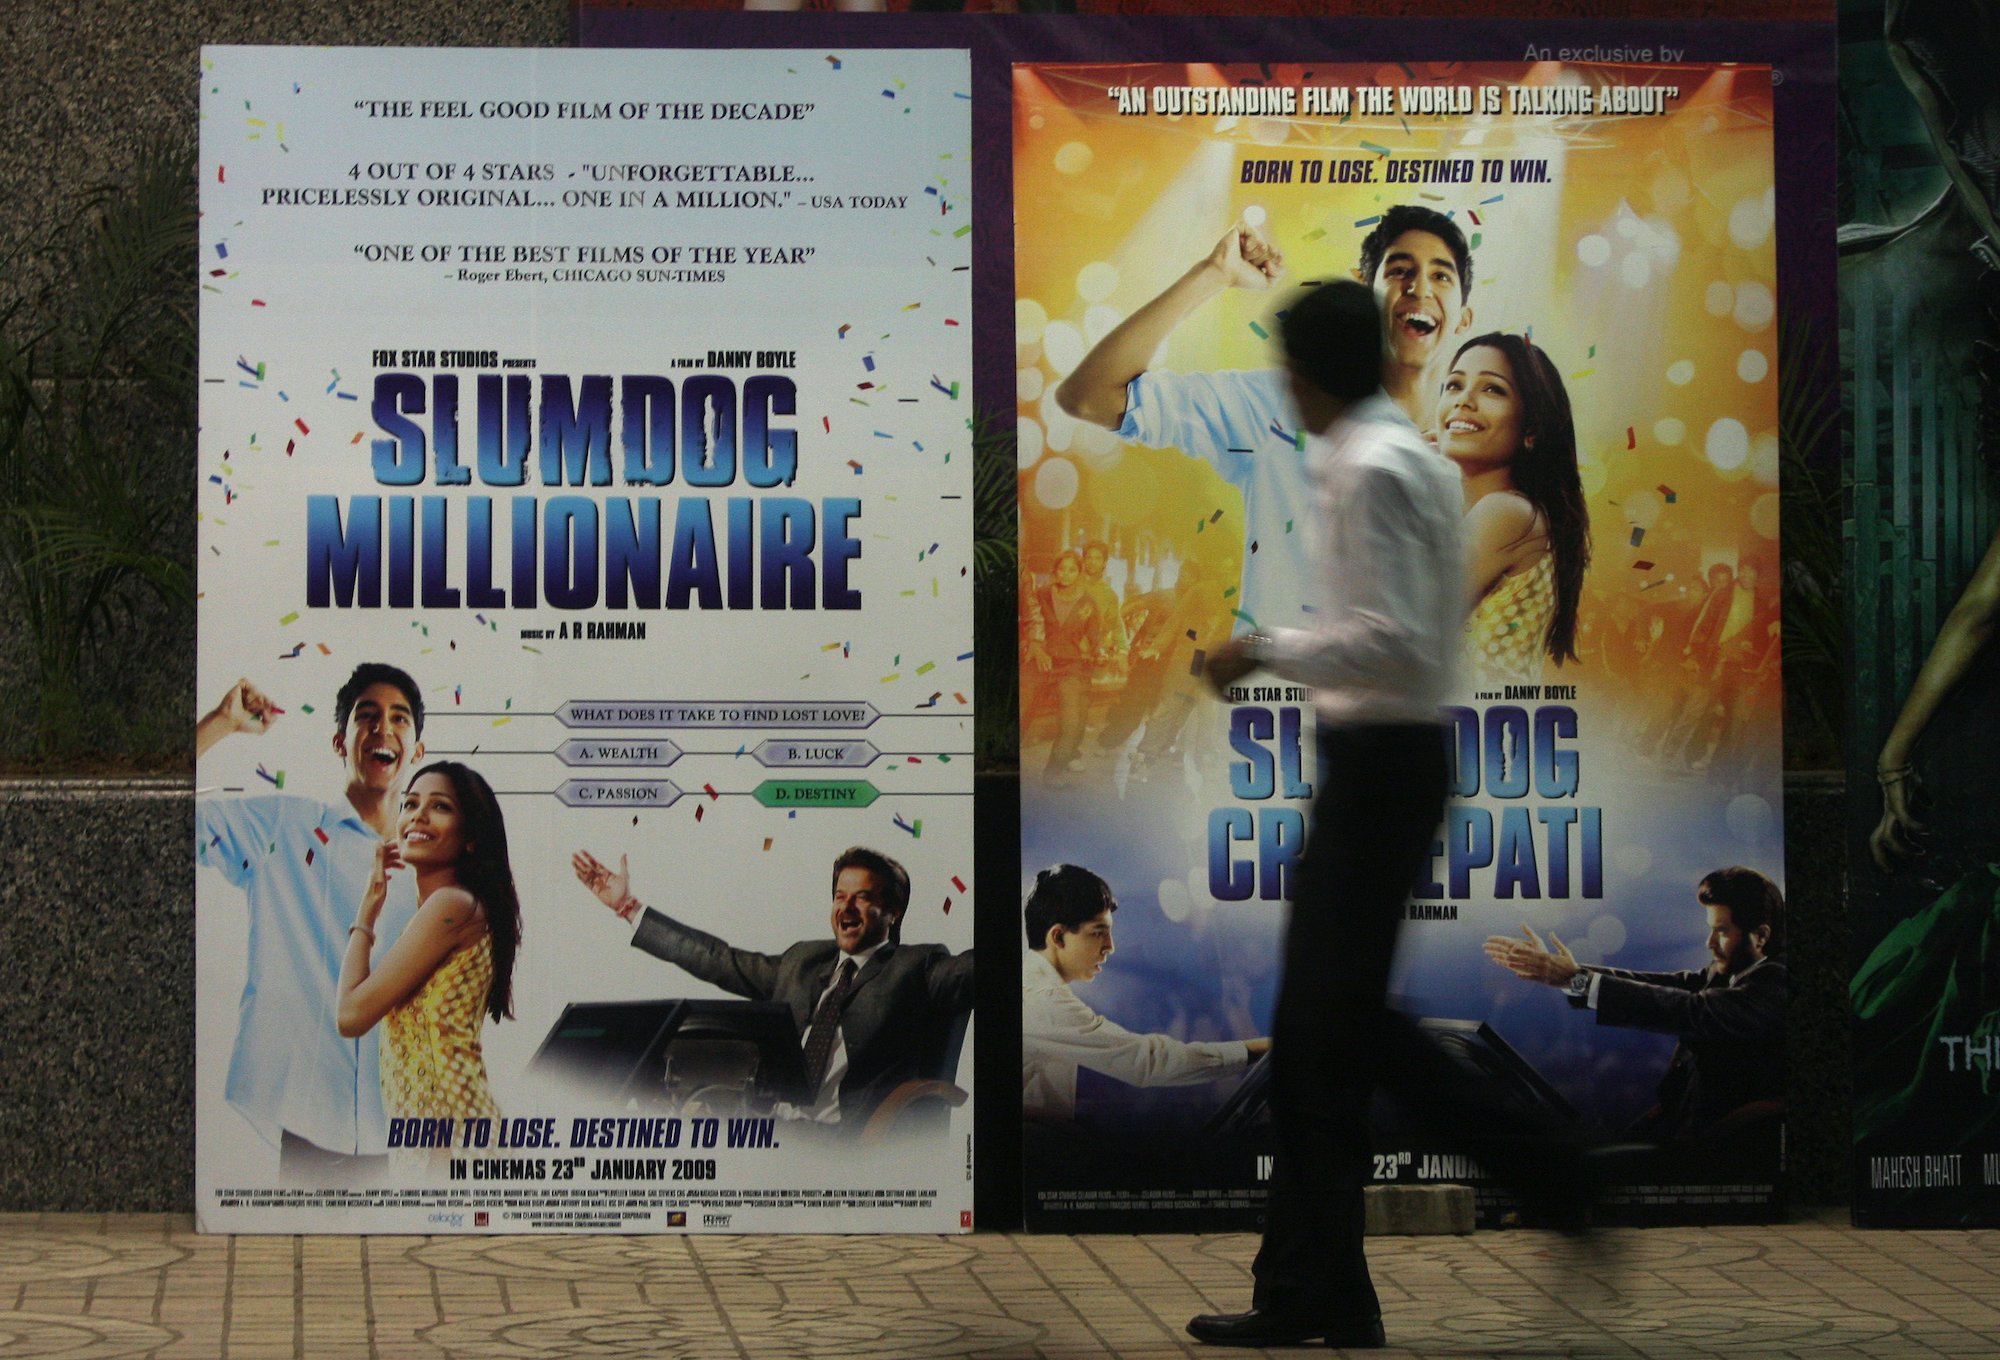 A person in front of a large banner of the movie Slumdog Millionaire